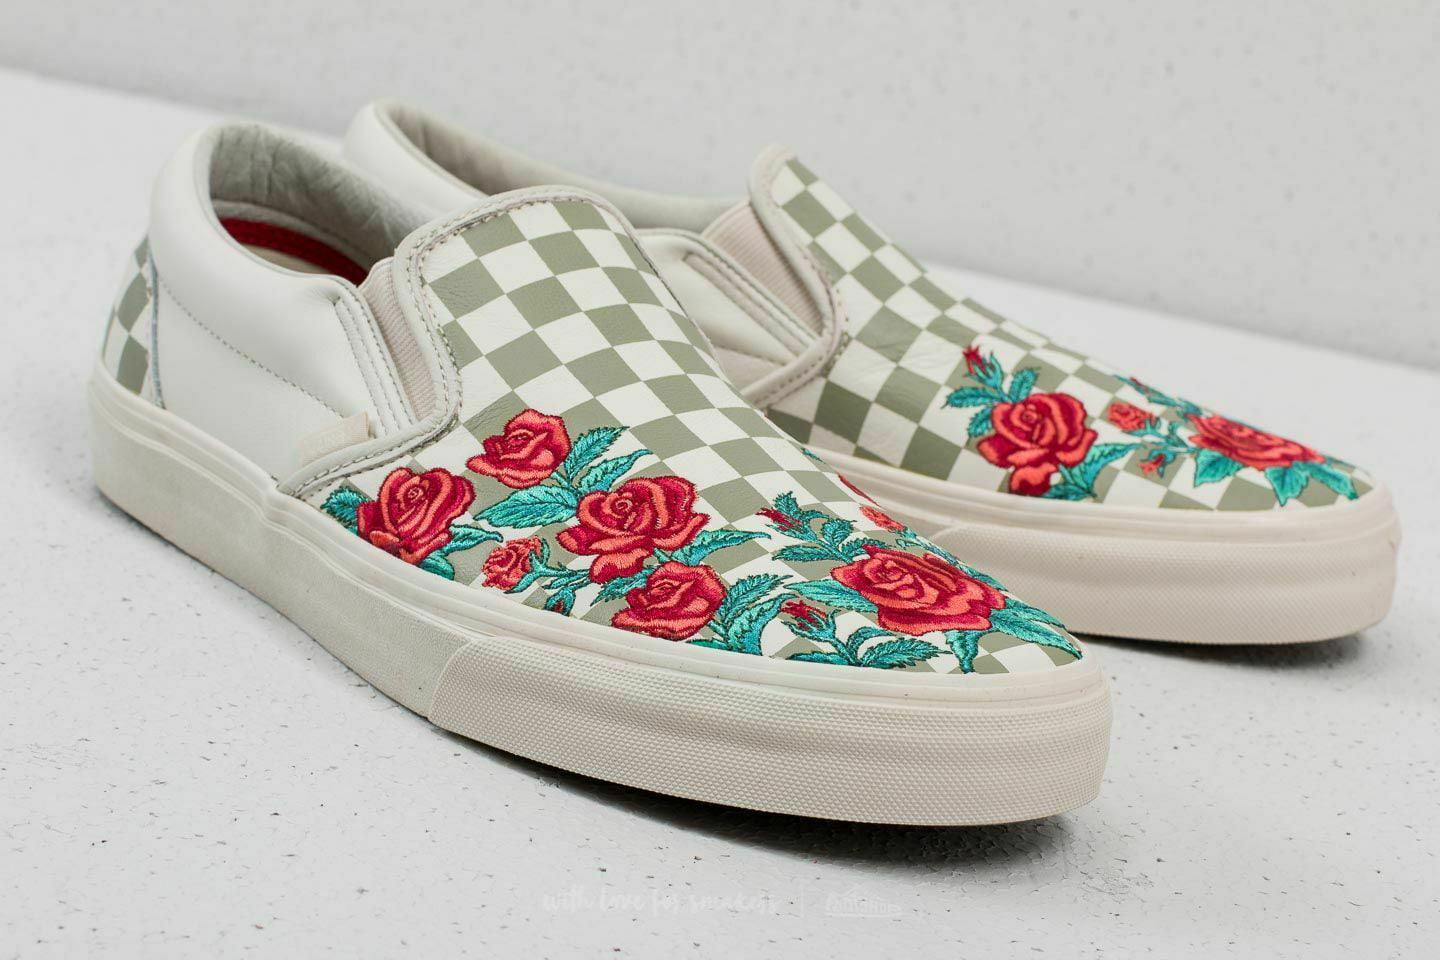 classic slip on dx rose embroidery